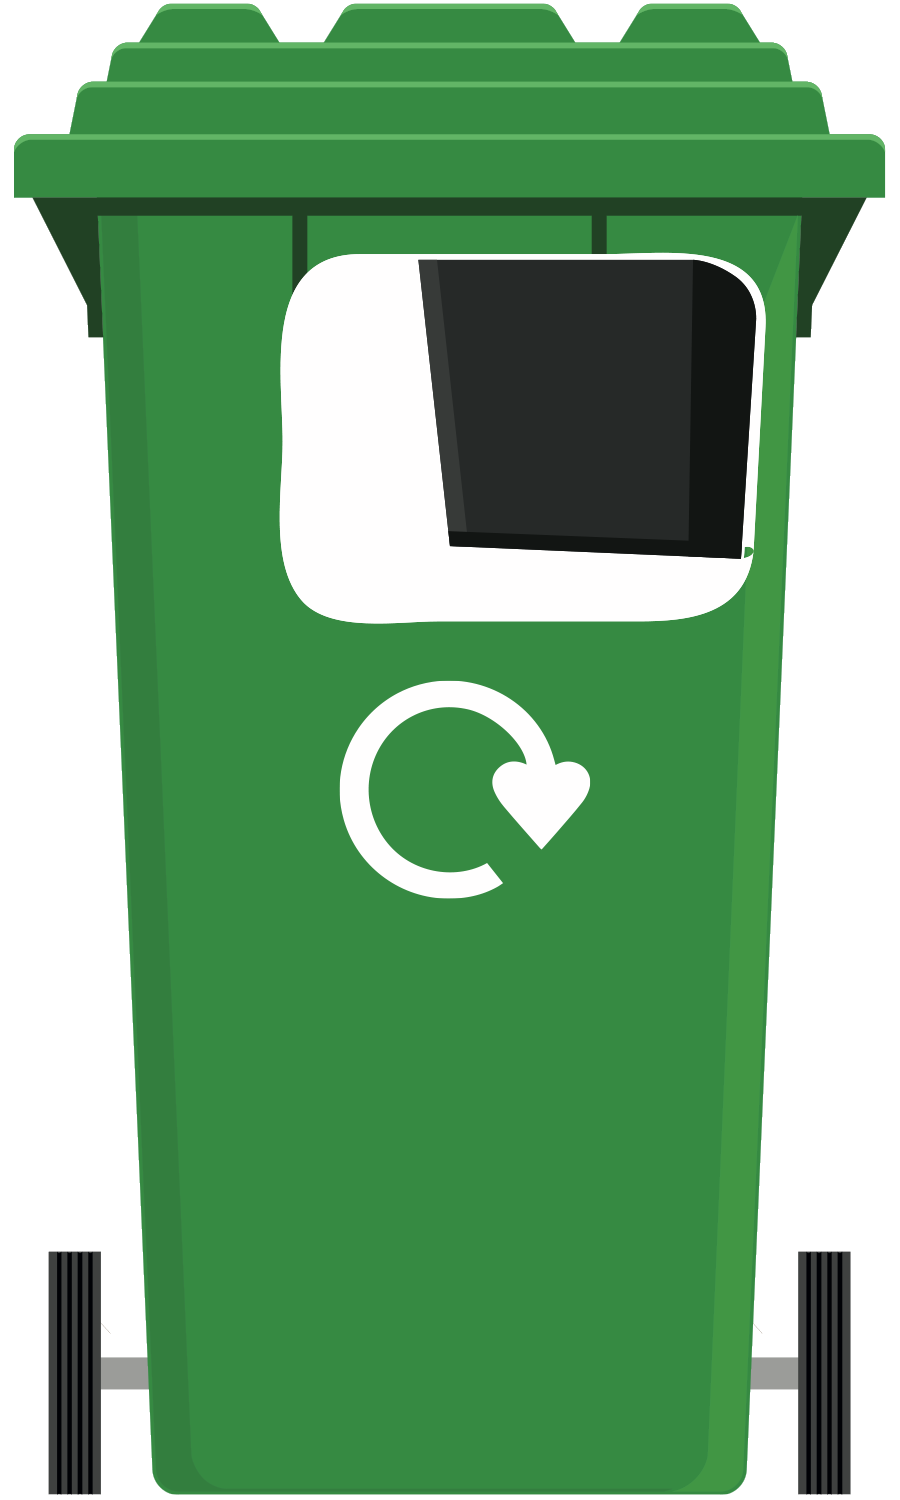 Green Empty Recycle Bin PNG Transparent Image